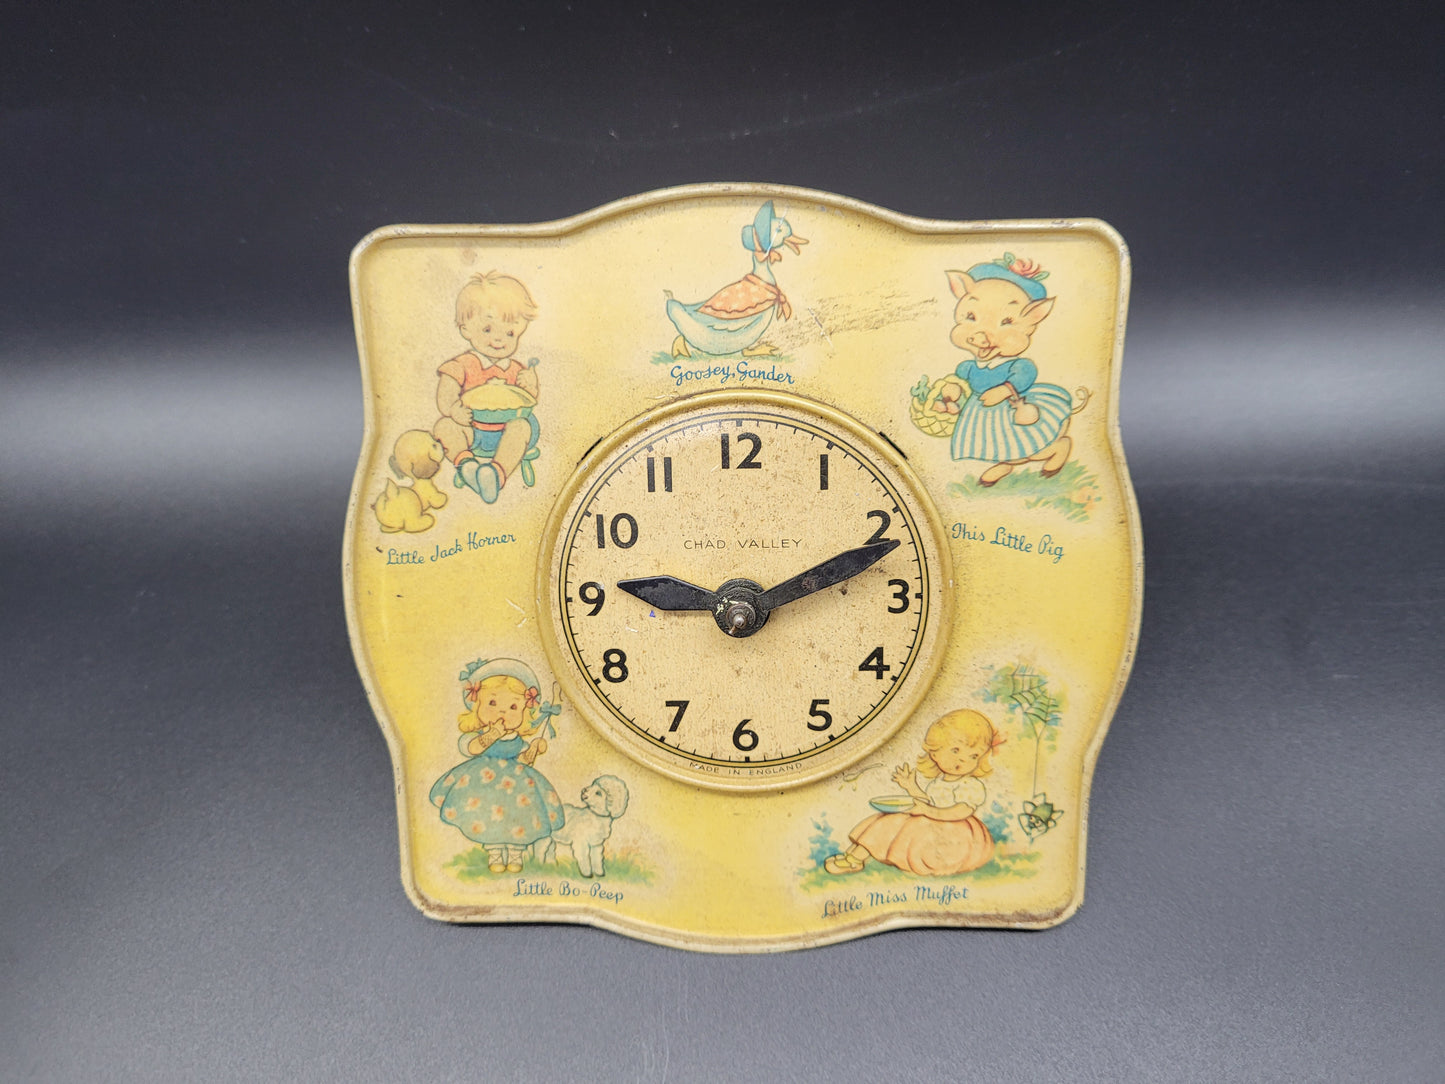 Vintage 1950s child's nursery rhyme clock by Chad Valley